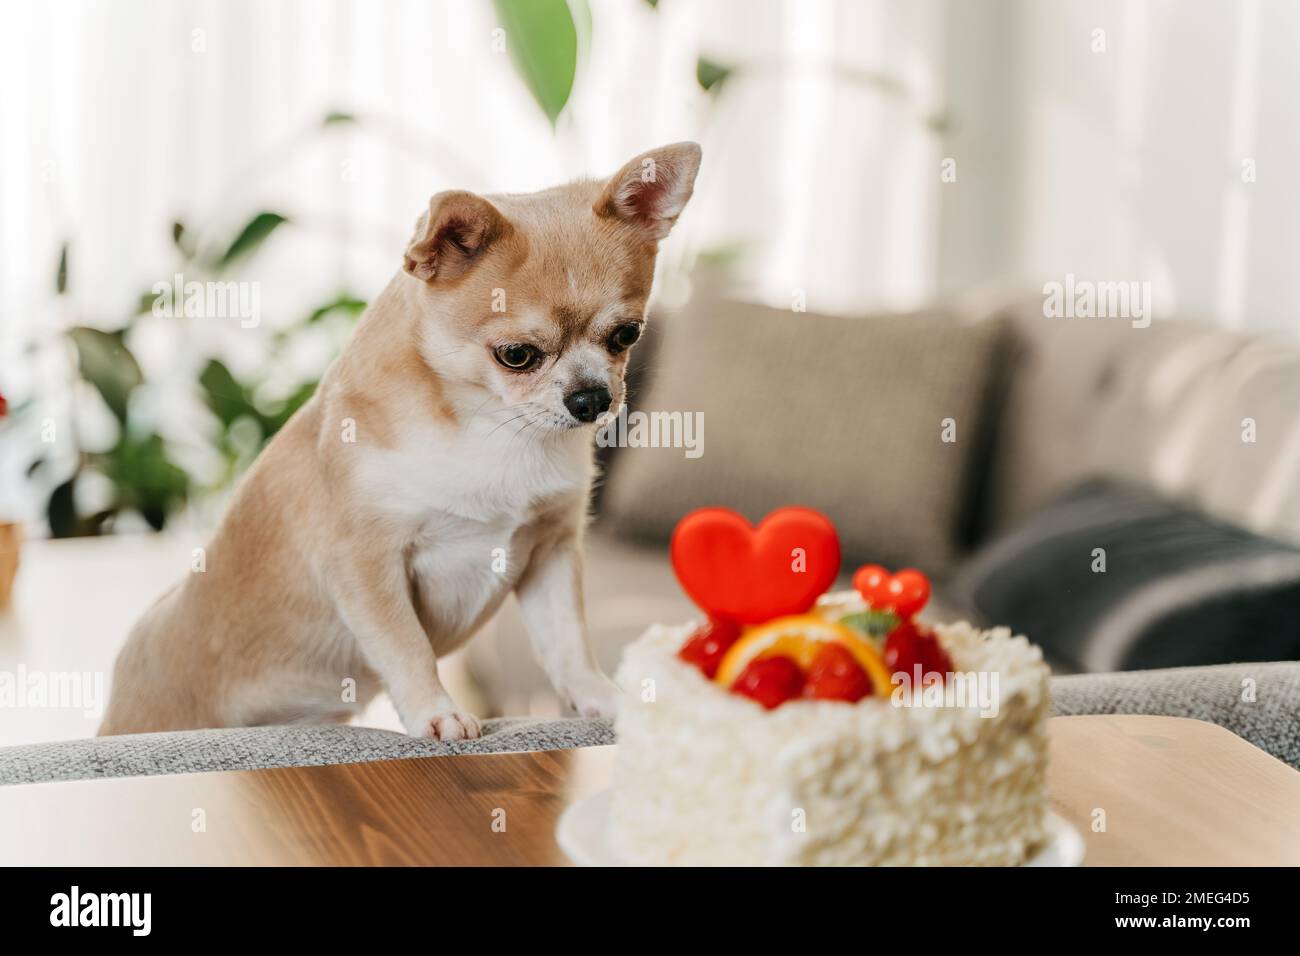 Dog wanted Valentine's Day cake. Funny chihuahua asking sweet pie with heart shape for Valentine day Stock Photo